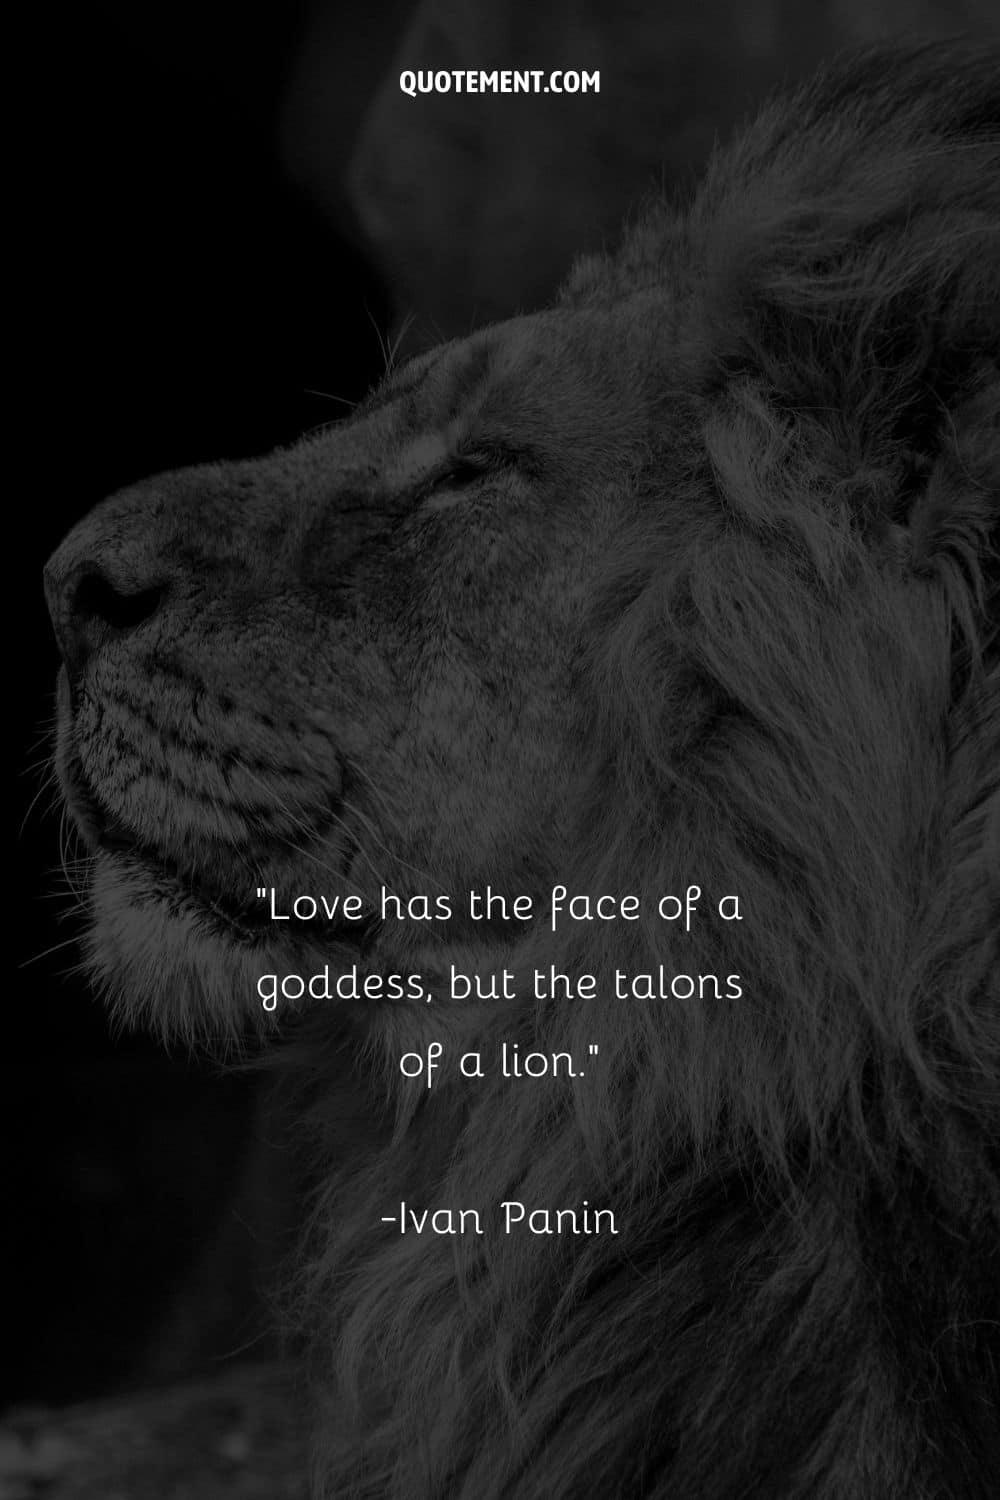 Love has the face of a goddess, but the talons of a lion.